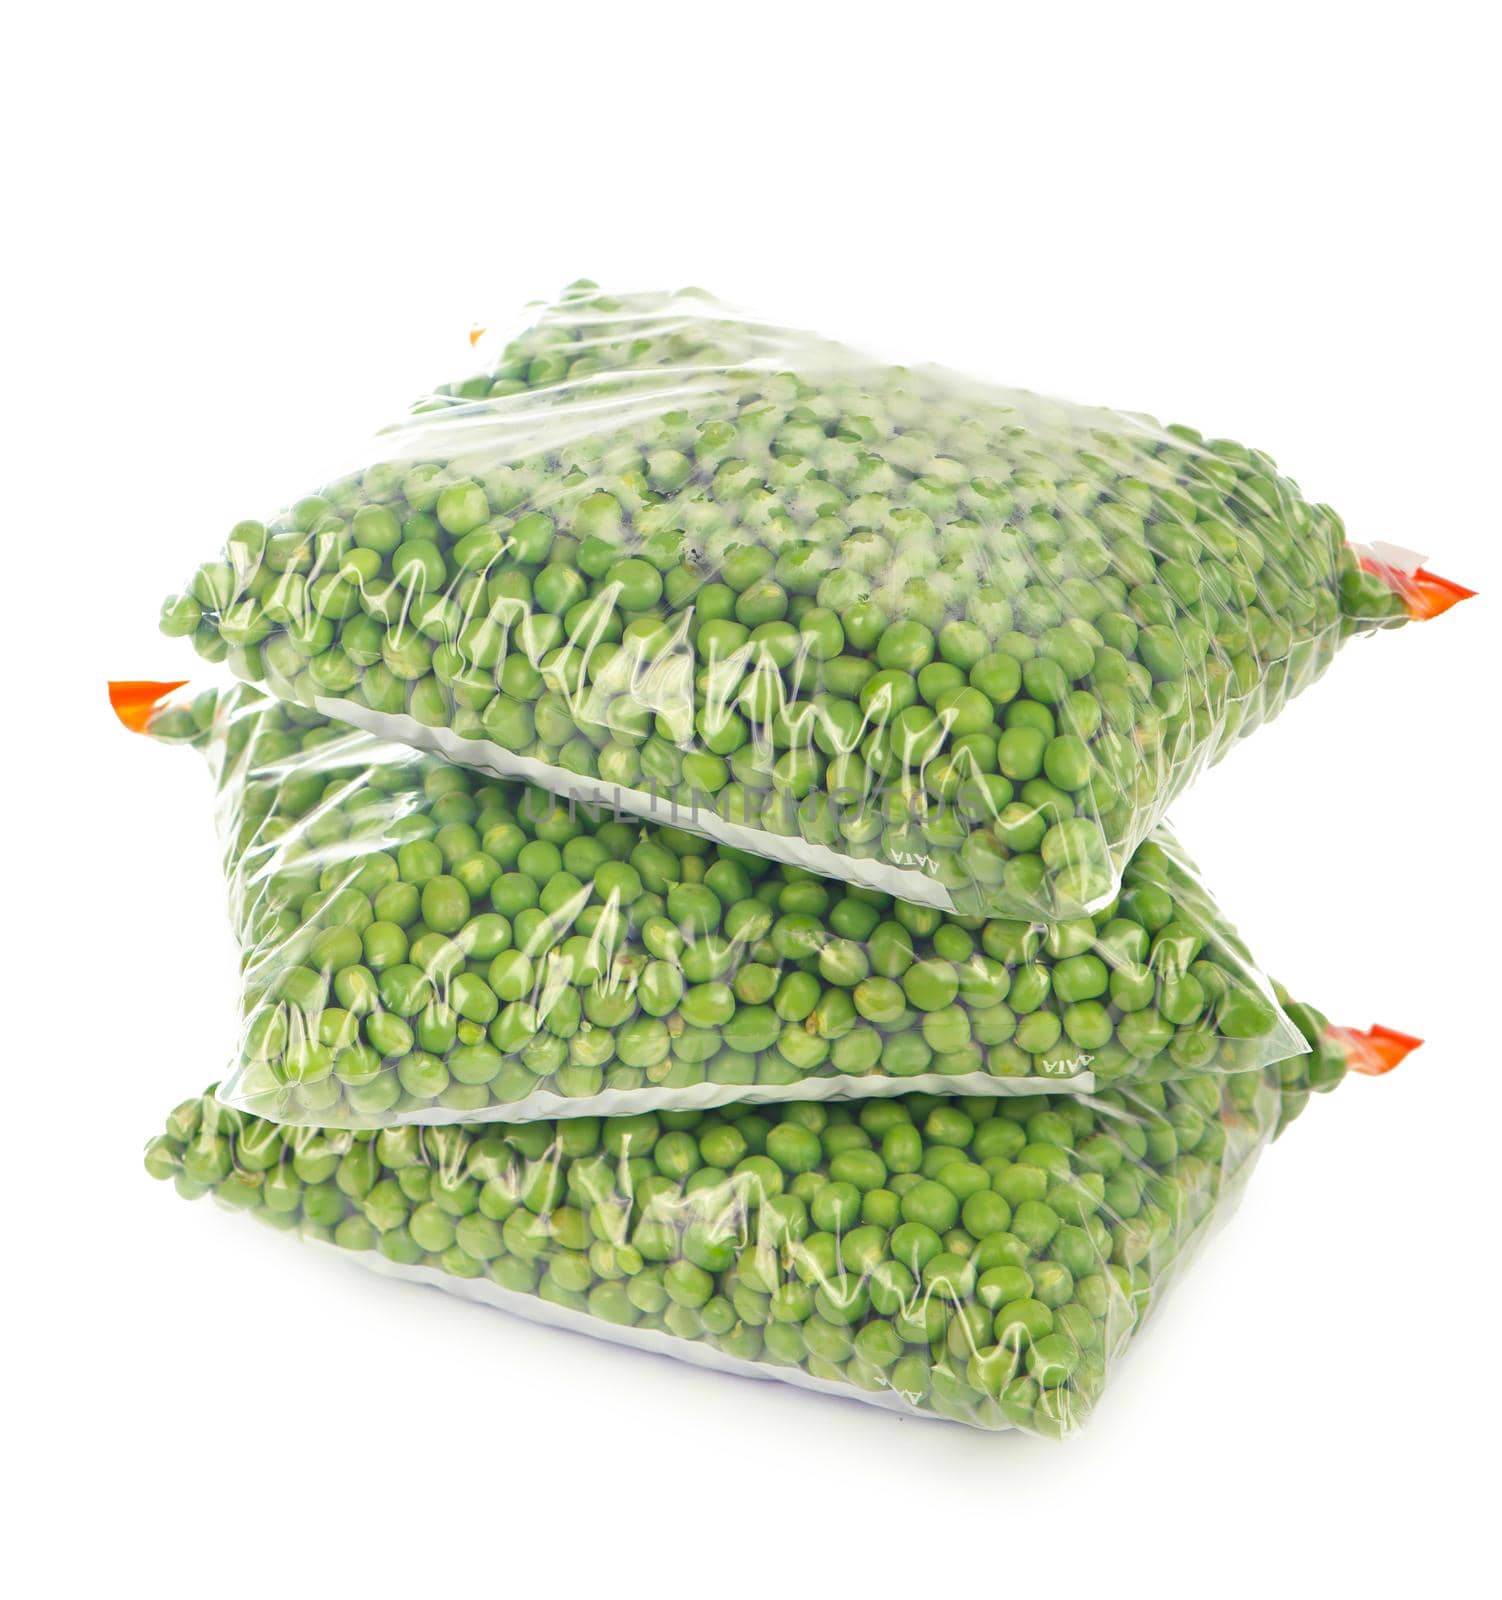 Composition with organic frozen vegetables on white background. Green peas in the package